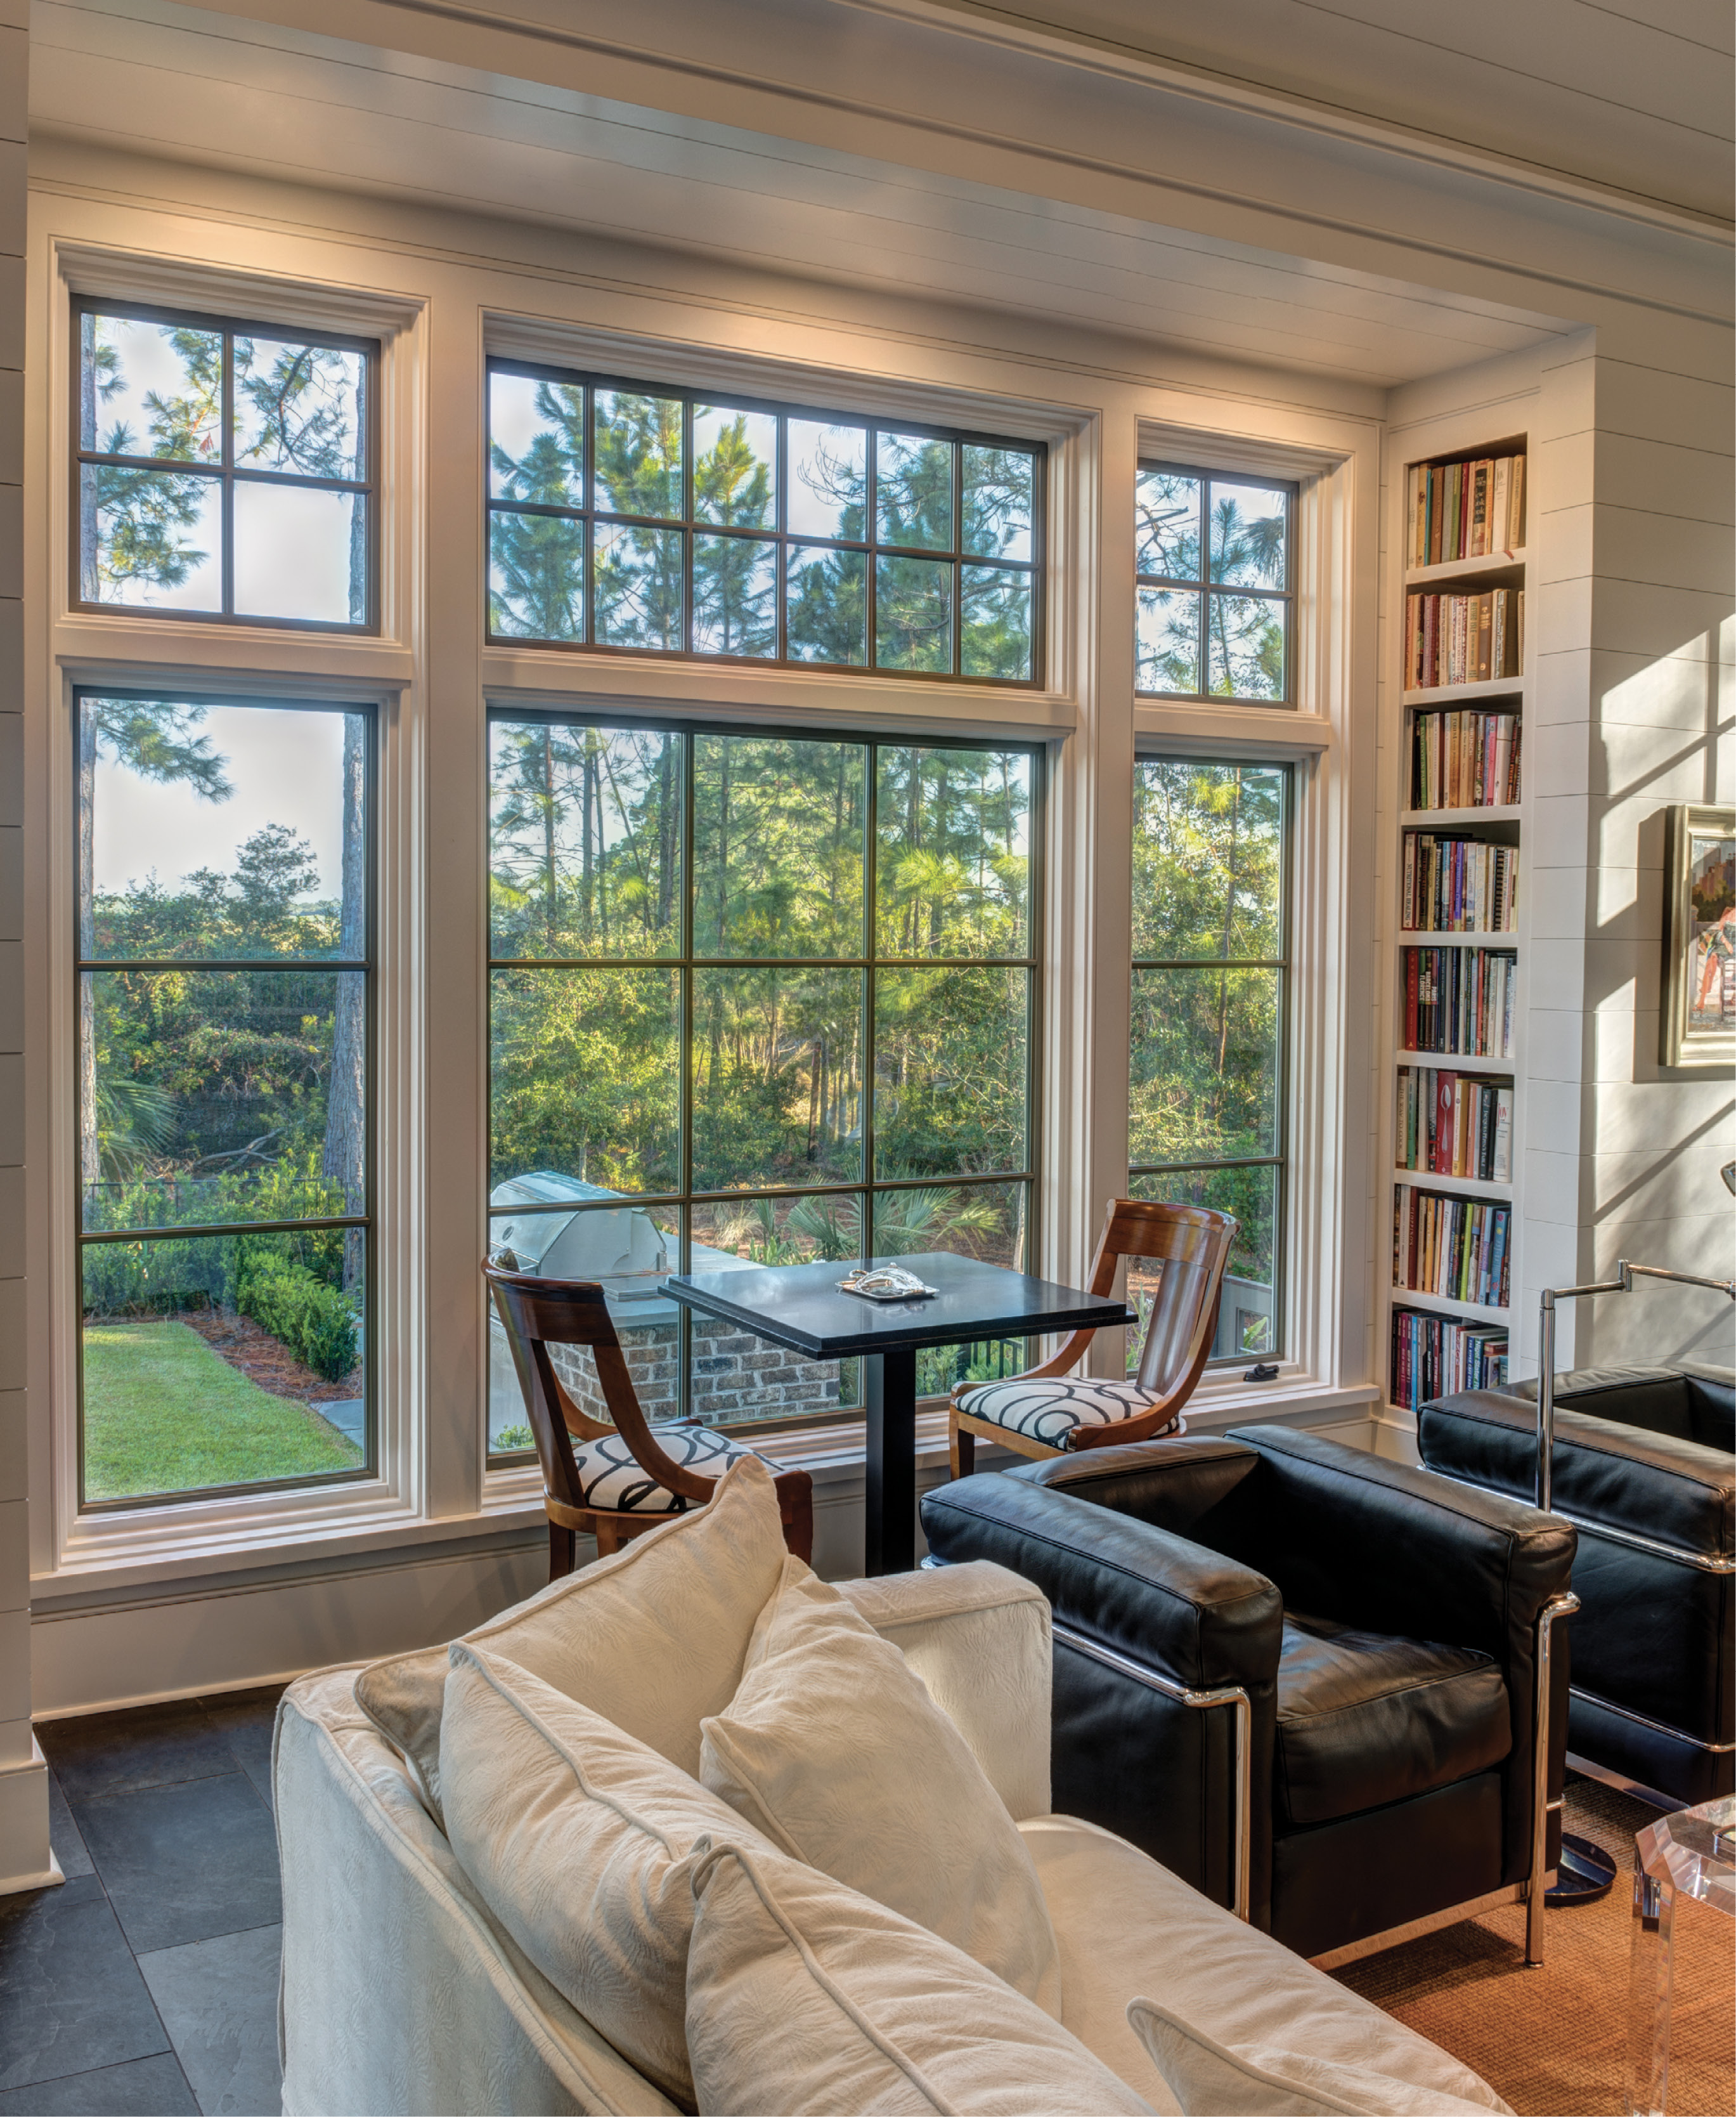 A STUDY IN CLASSICS: Outfitted with shiplap walls, bluestone flooring, and select furnishings by Baker and Ralph Lauren (many designed by architects), the library features a cozy fireplace, plus a wall of custom built-ins.